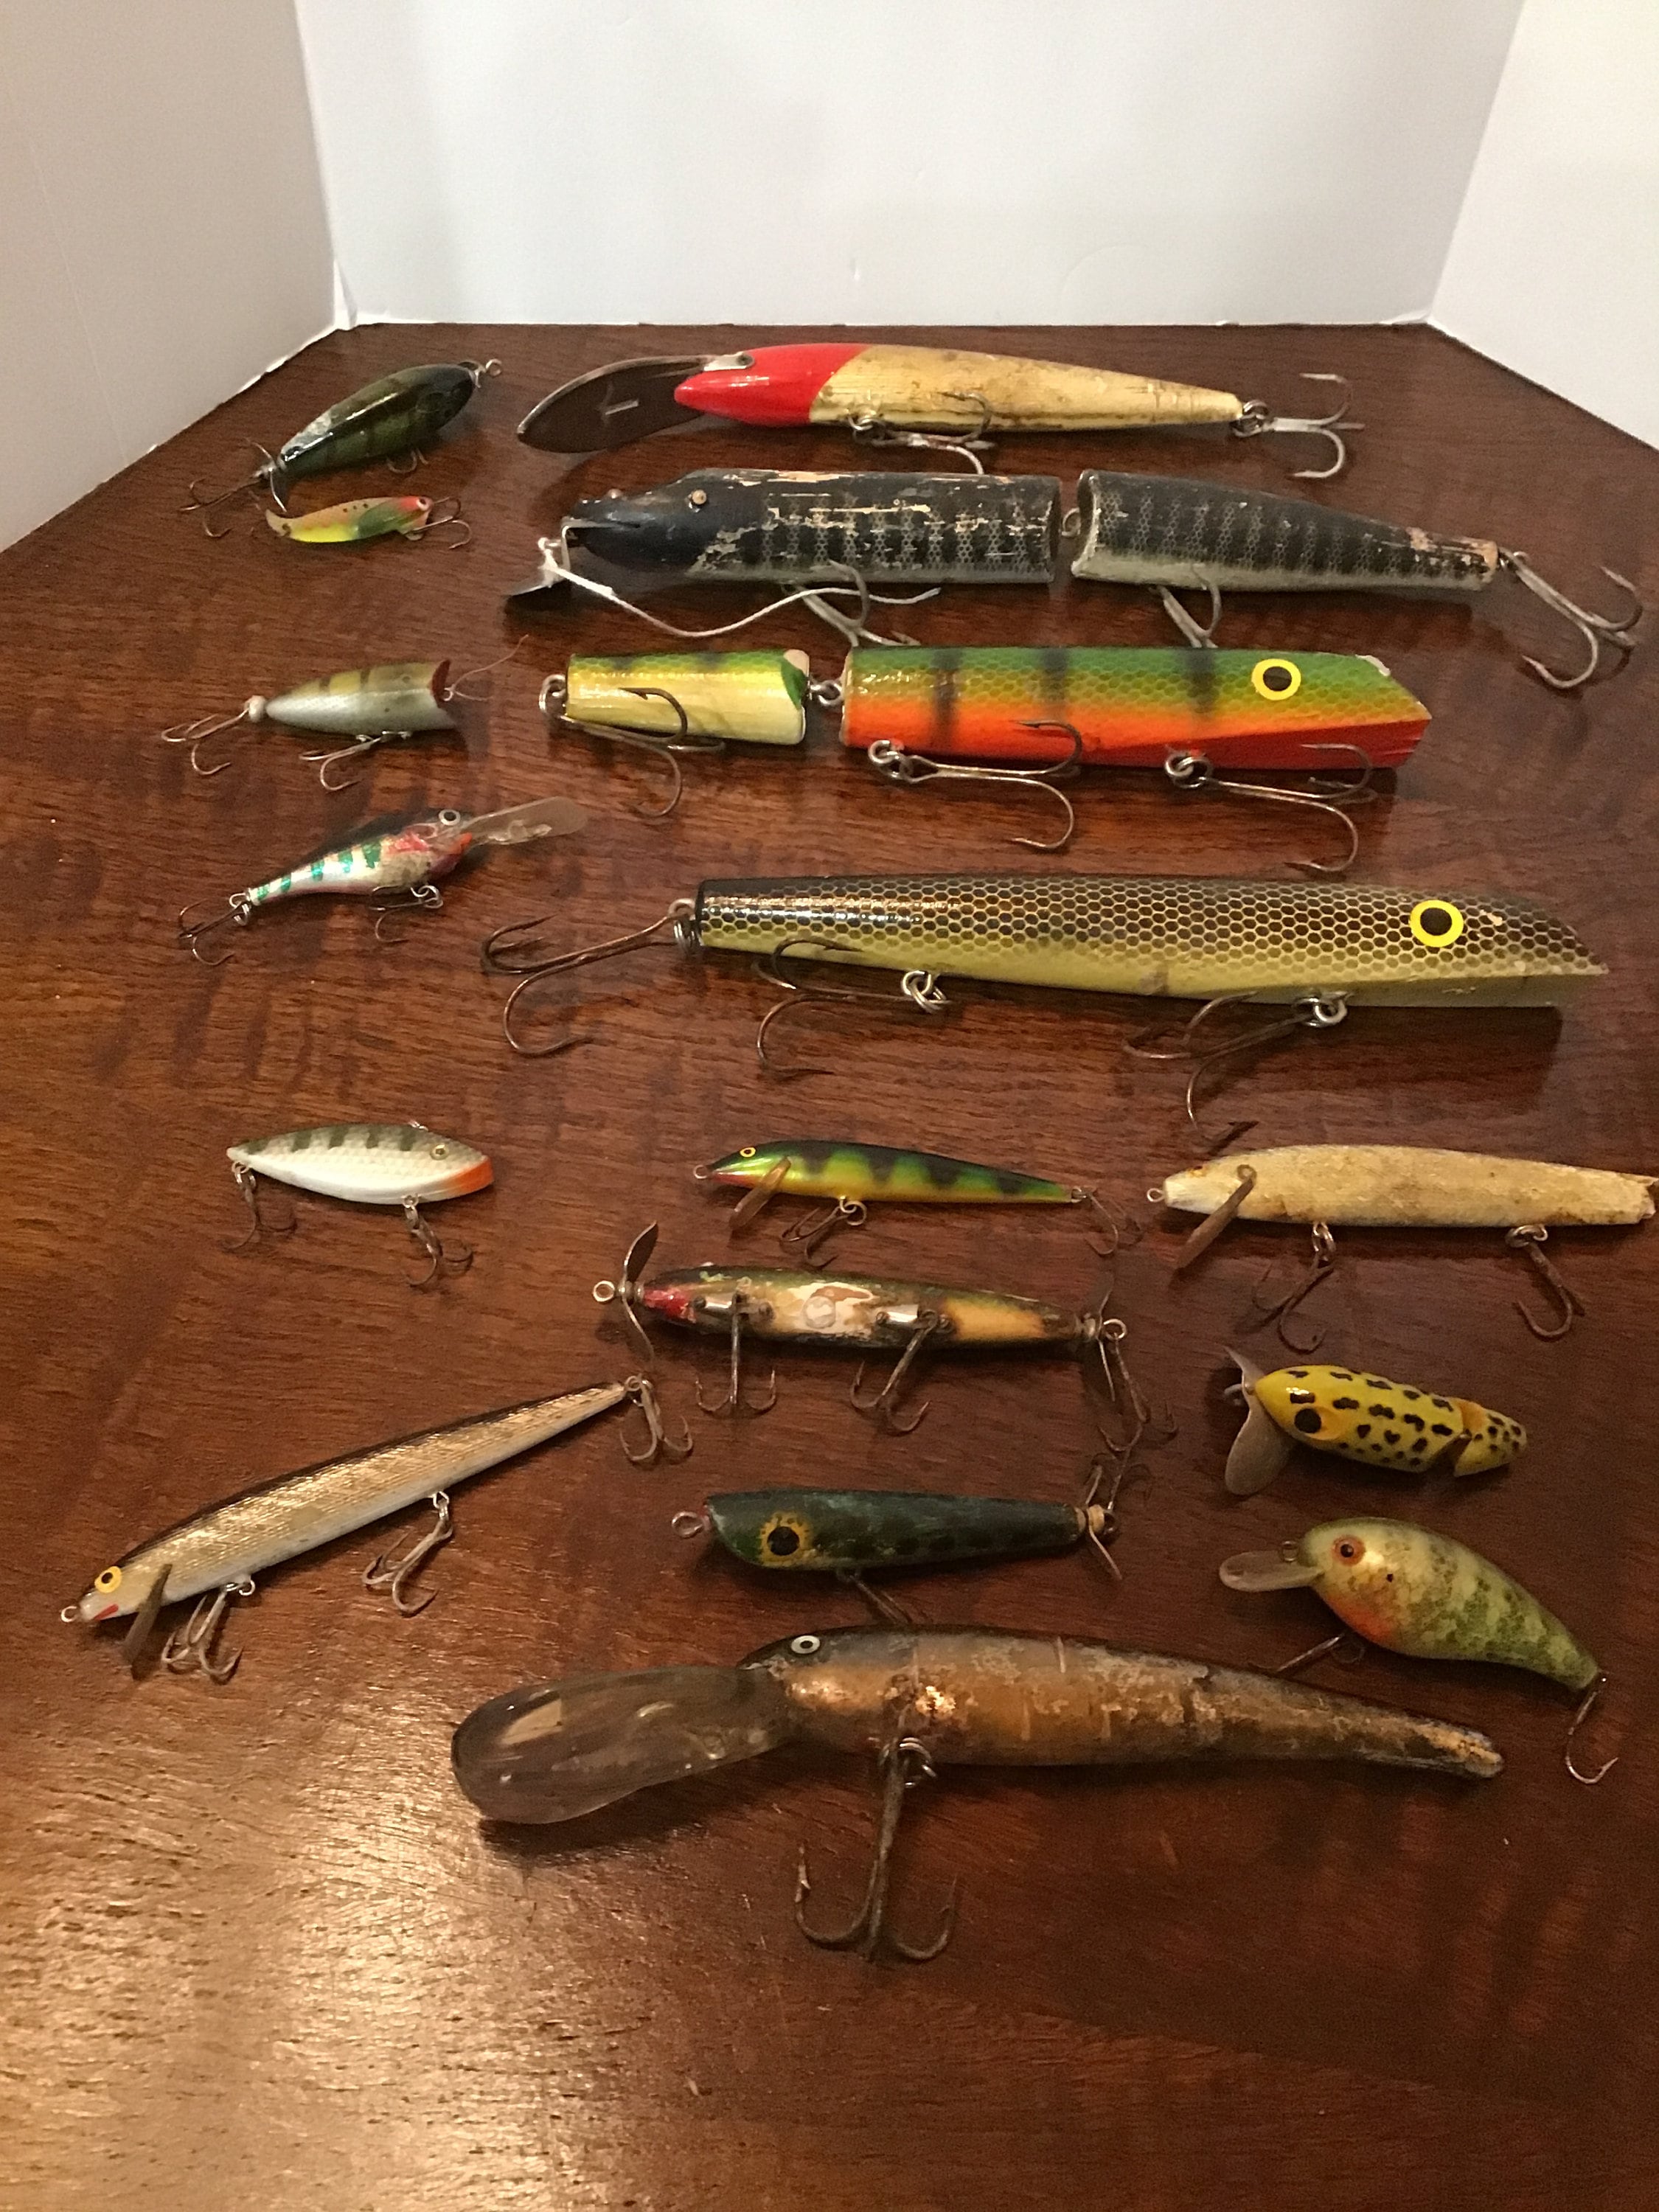 Fishing Lures for sale in Old Minto, Alaska, Facebook Marketplace